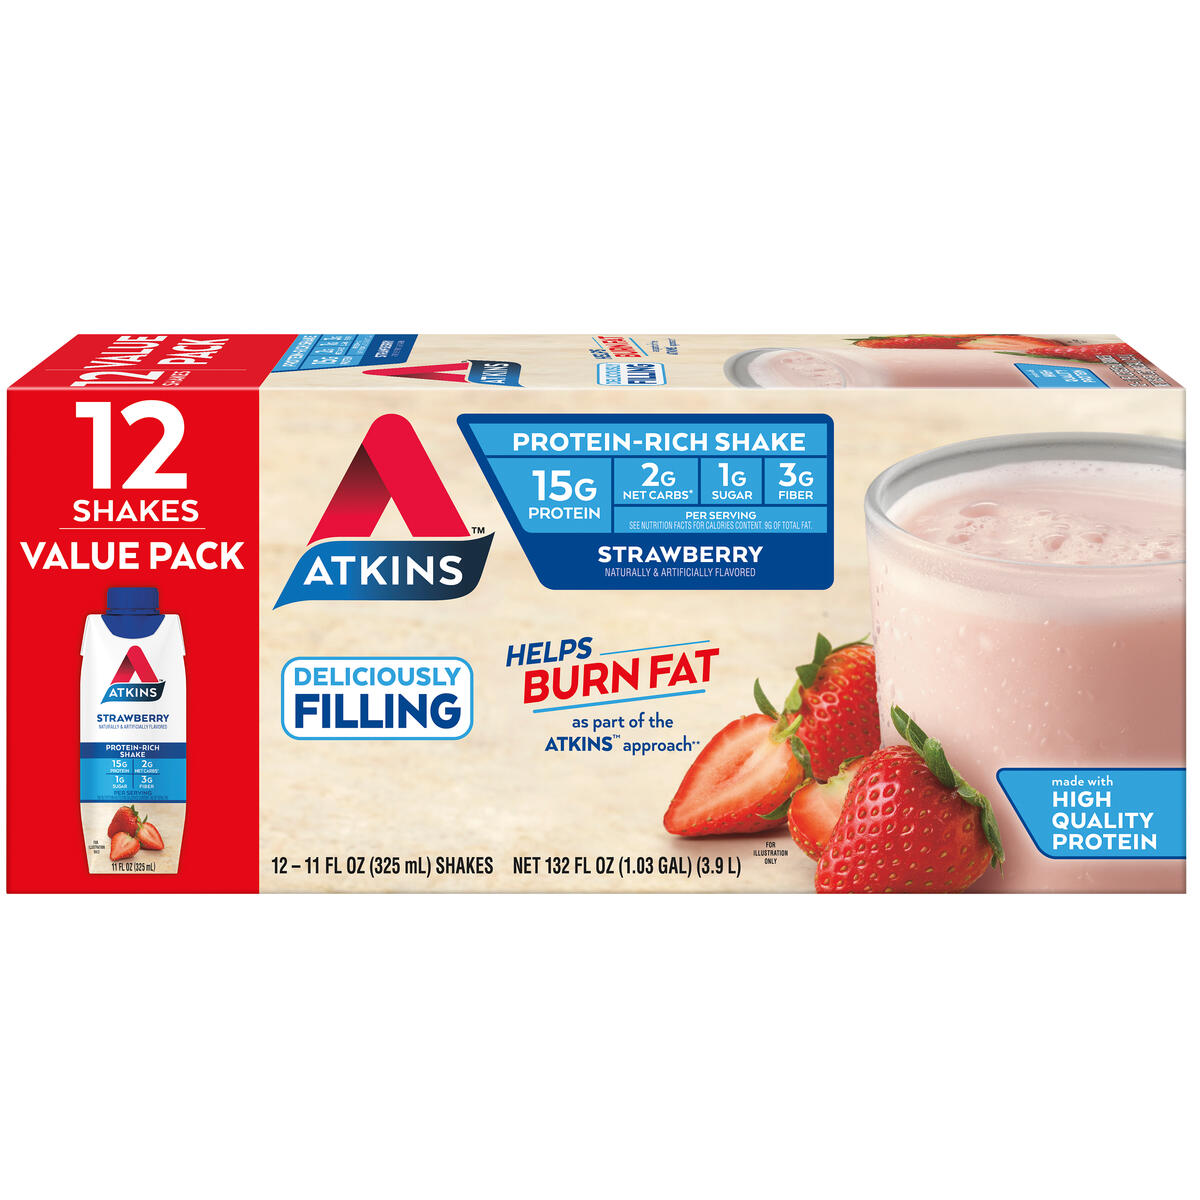 Atkins Protein Shake, Strawberry, Keto Friendly, 15g of Protein, 12 Ct (Ready to Drink) - image 1 of 9